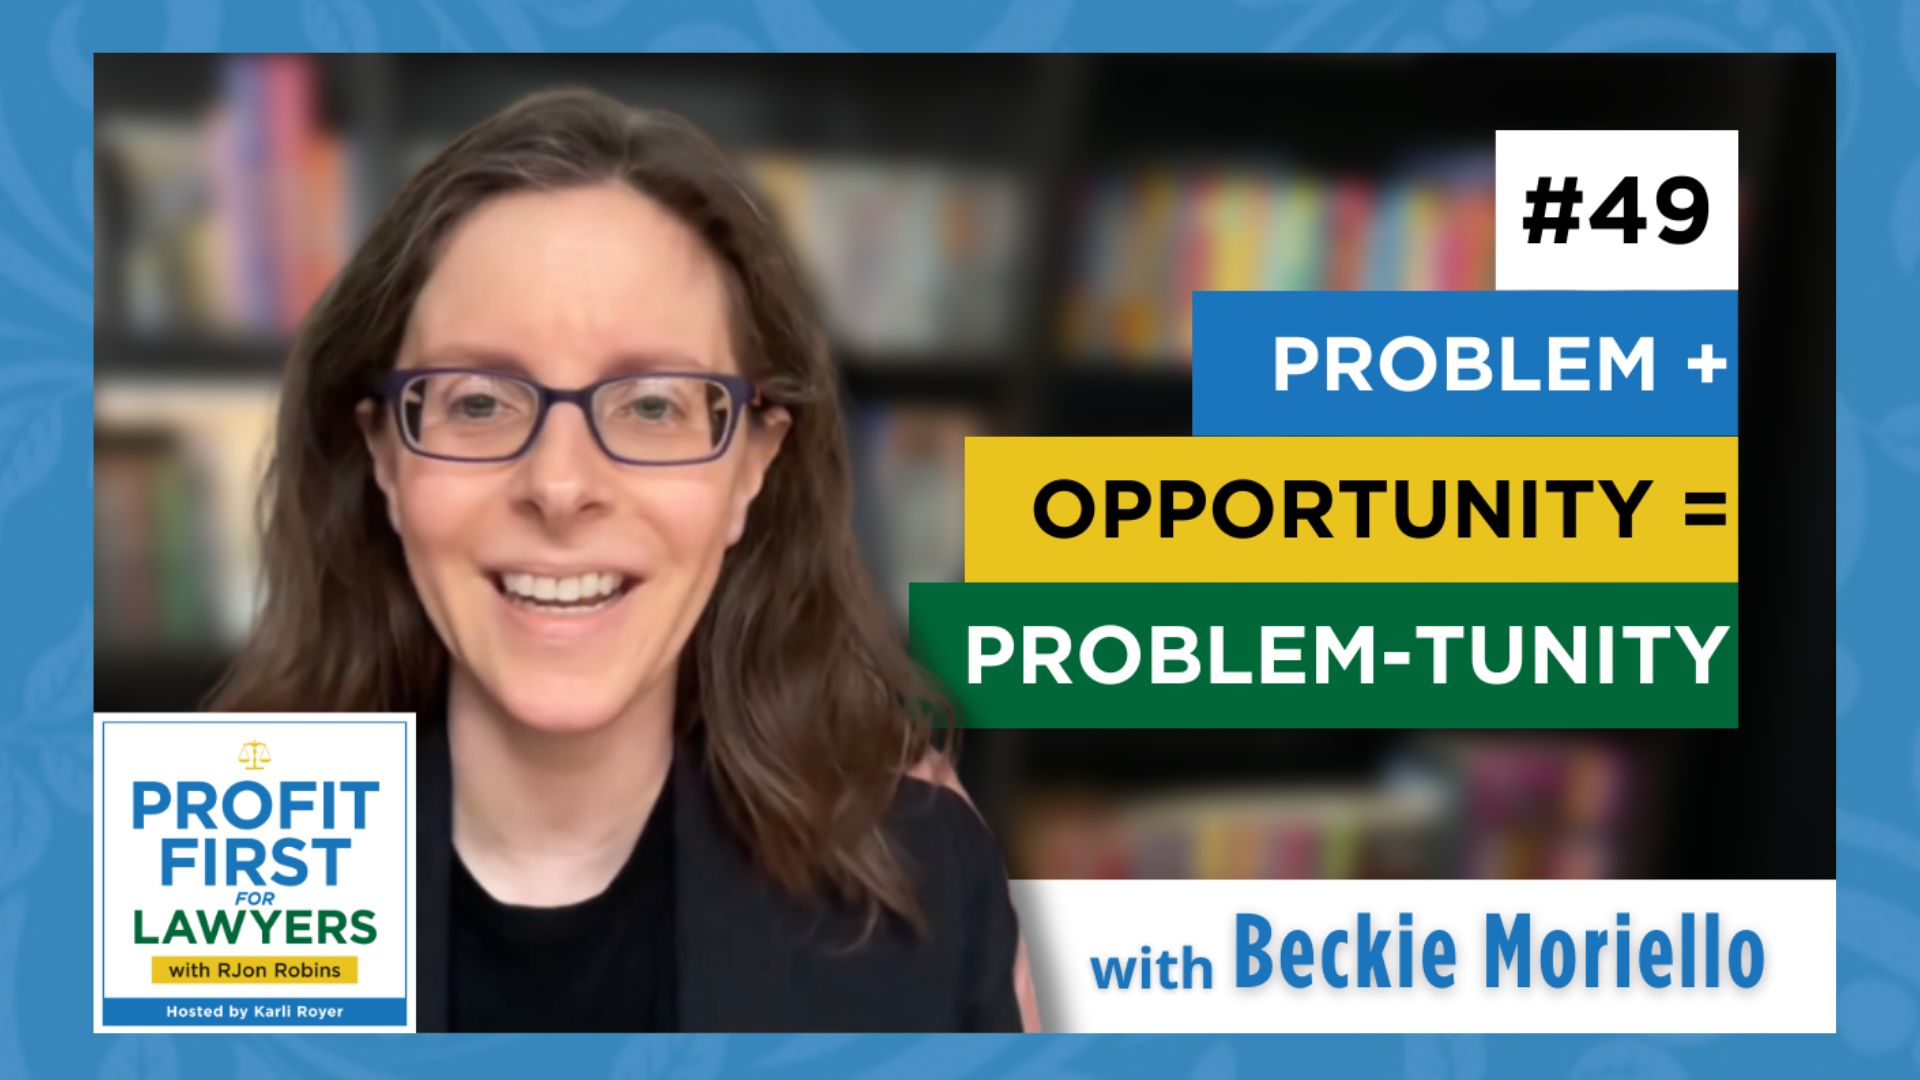 featured image of Beckie Mariello, law firm owner. Episode 49 Problem + Opportunity = Problem-Tunity